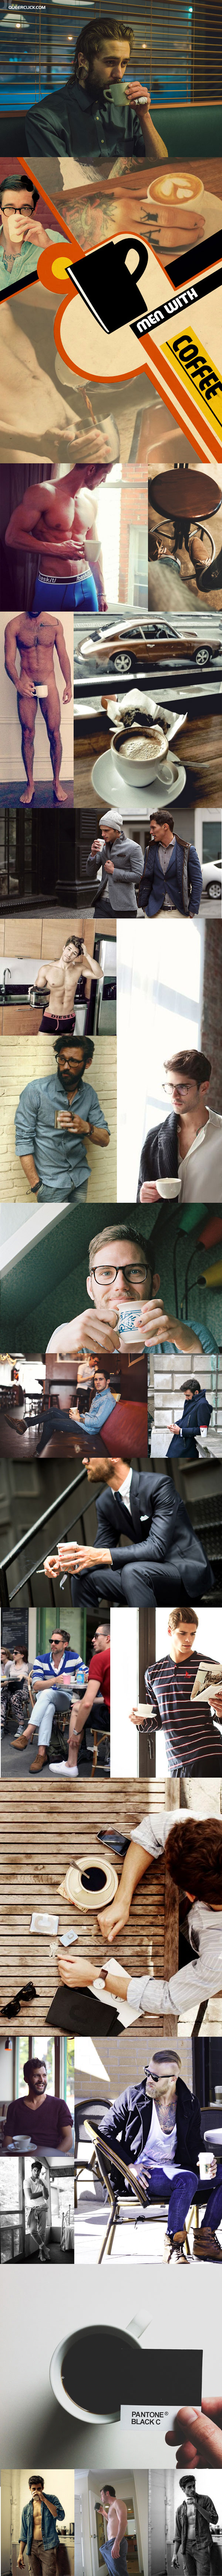 men-with-coffee-a.jpg